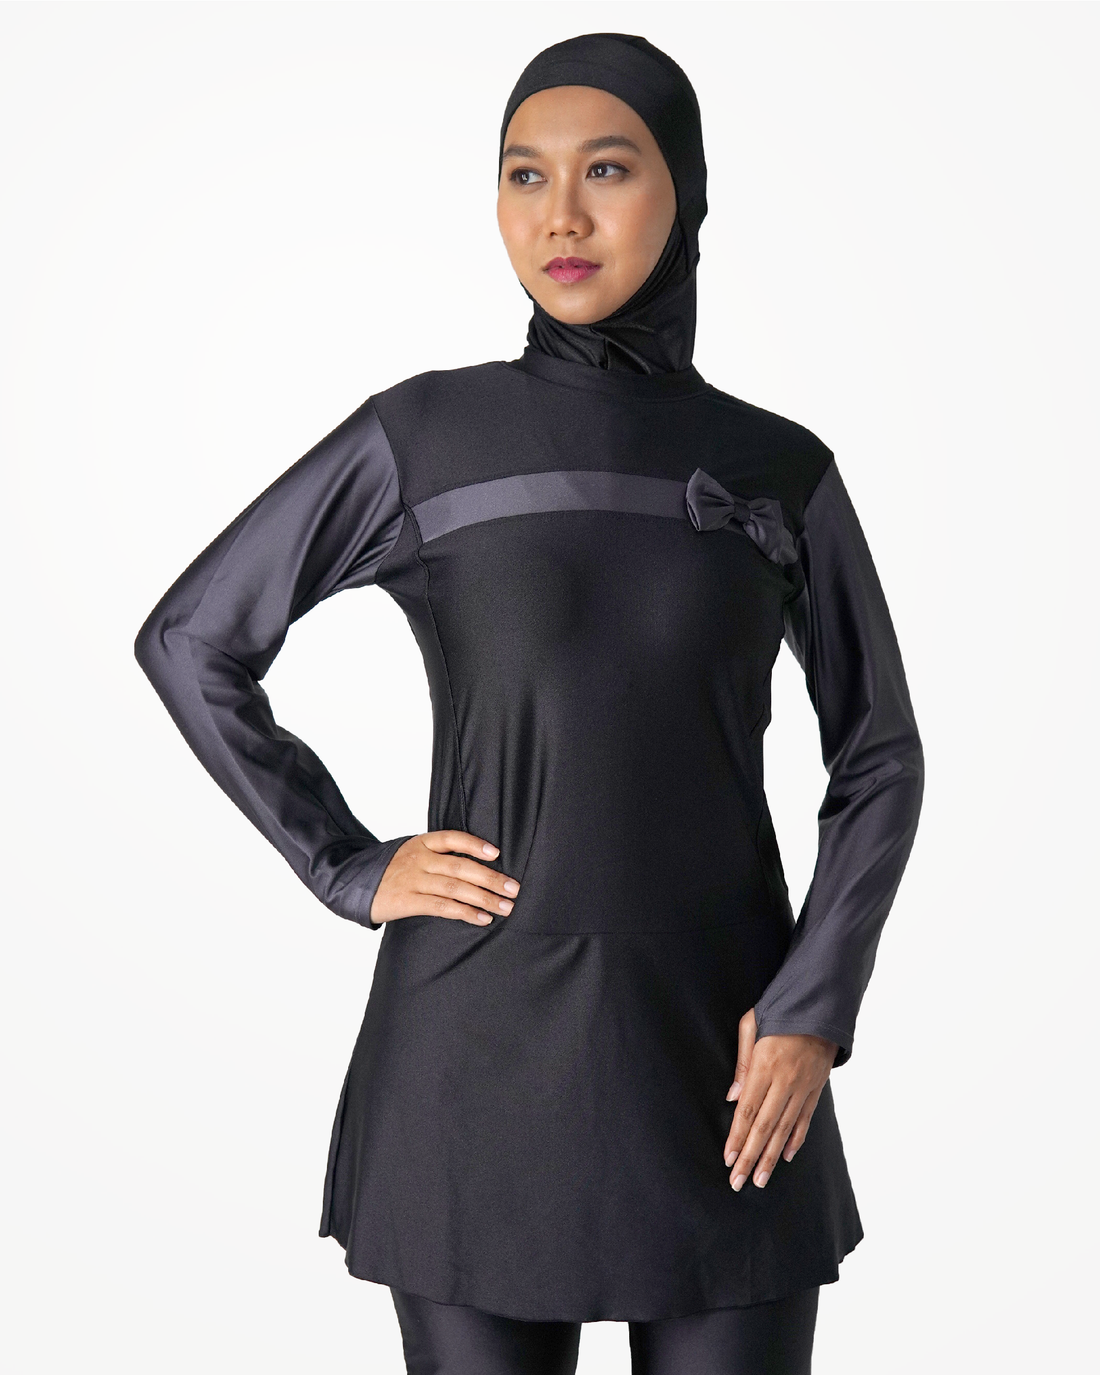  Muslimah Swimsuit Allure Dress Top Black and Grey with ribbon and grey strip across chest